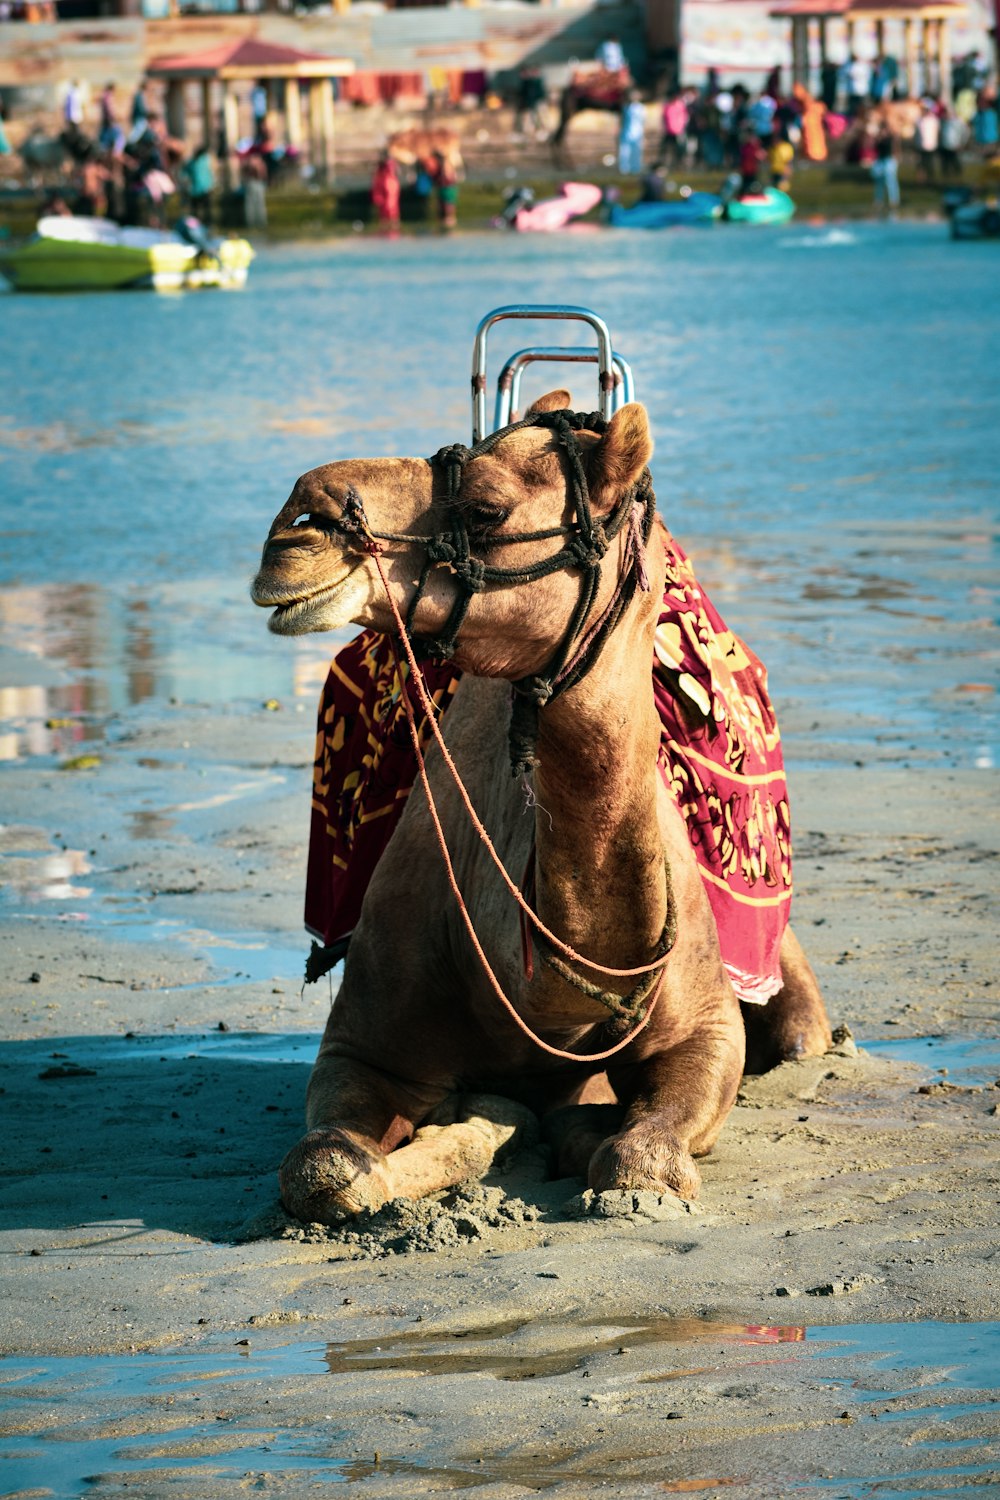 a camel with a saddle sitting on a beach